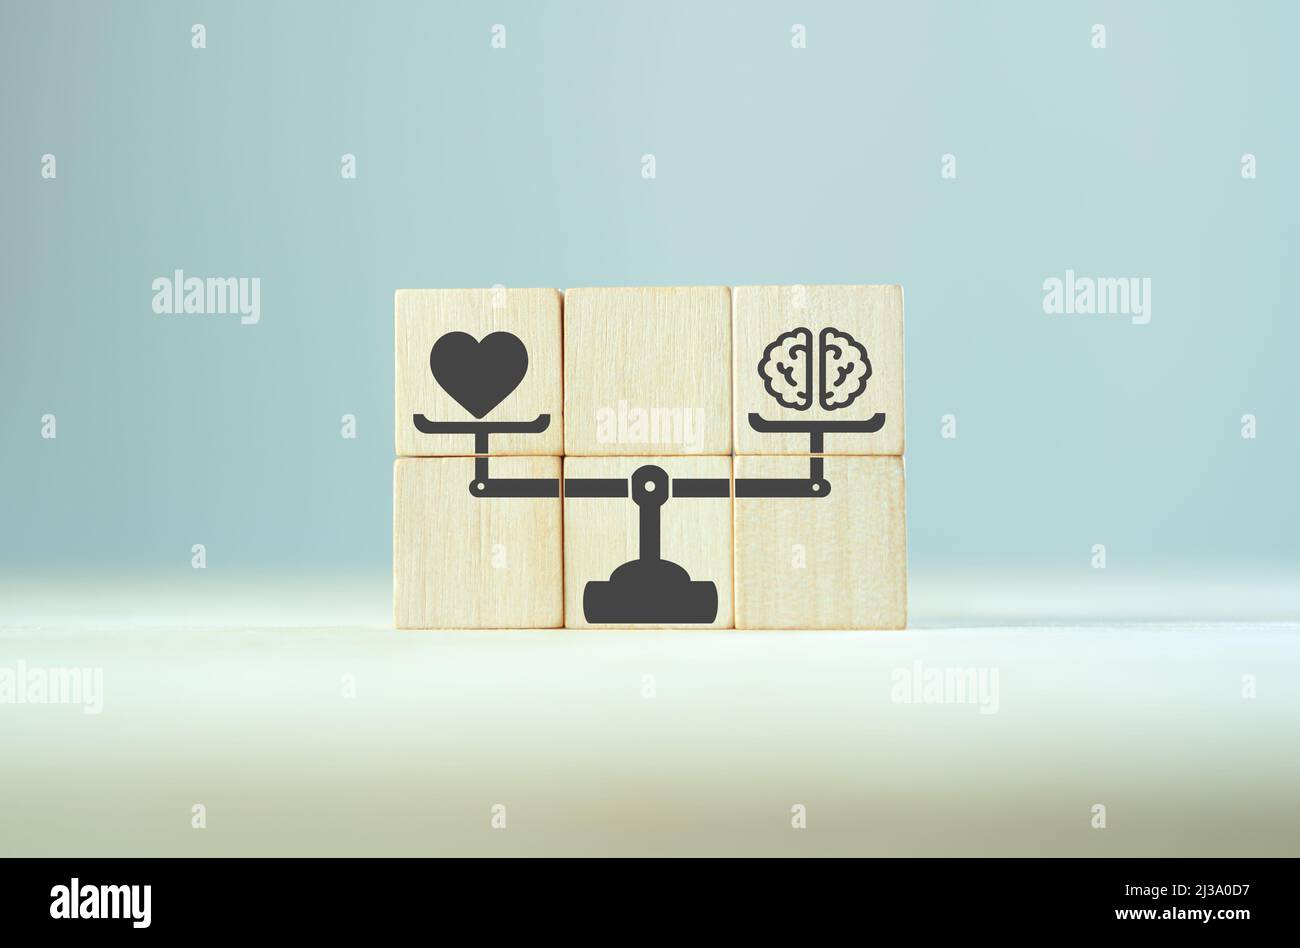 Balancing hard and soft skills concept. Training of skills Human resource management(HRM). wooden cubes with hard and soft skills on scales icon for c Stock Photo